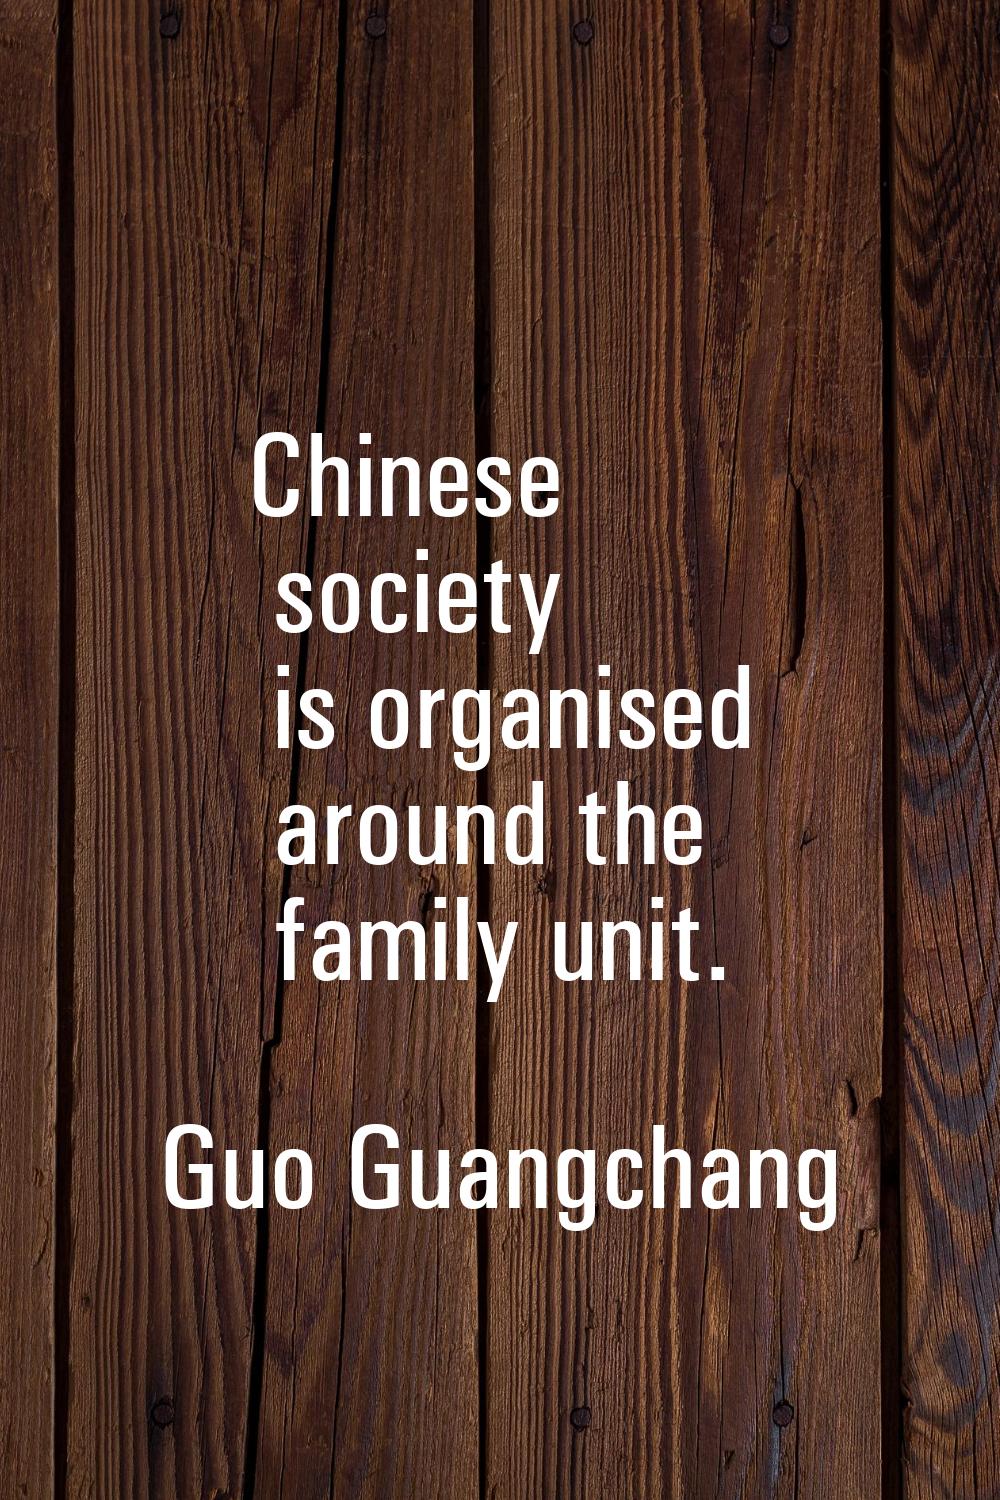 Chinese society is organised around the family unit.